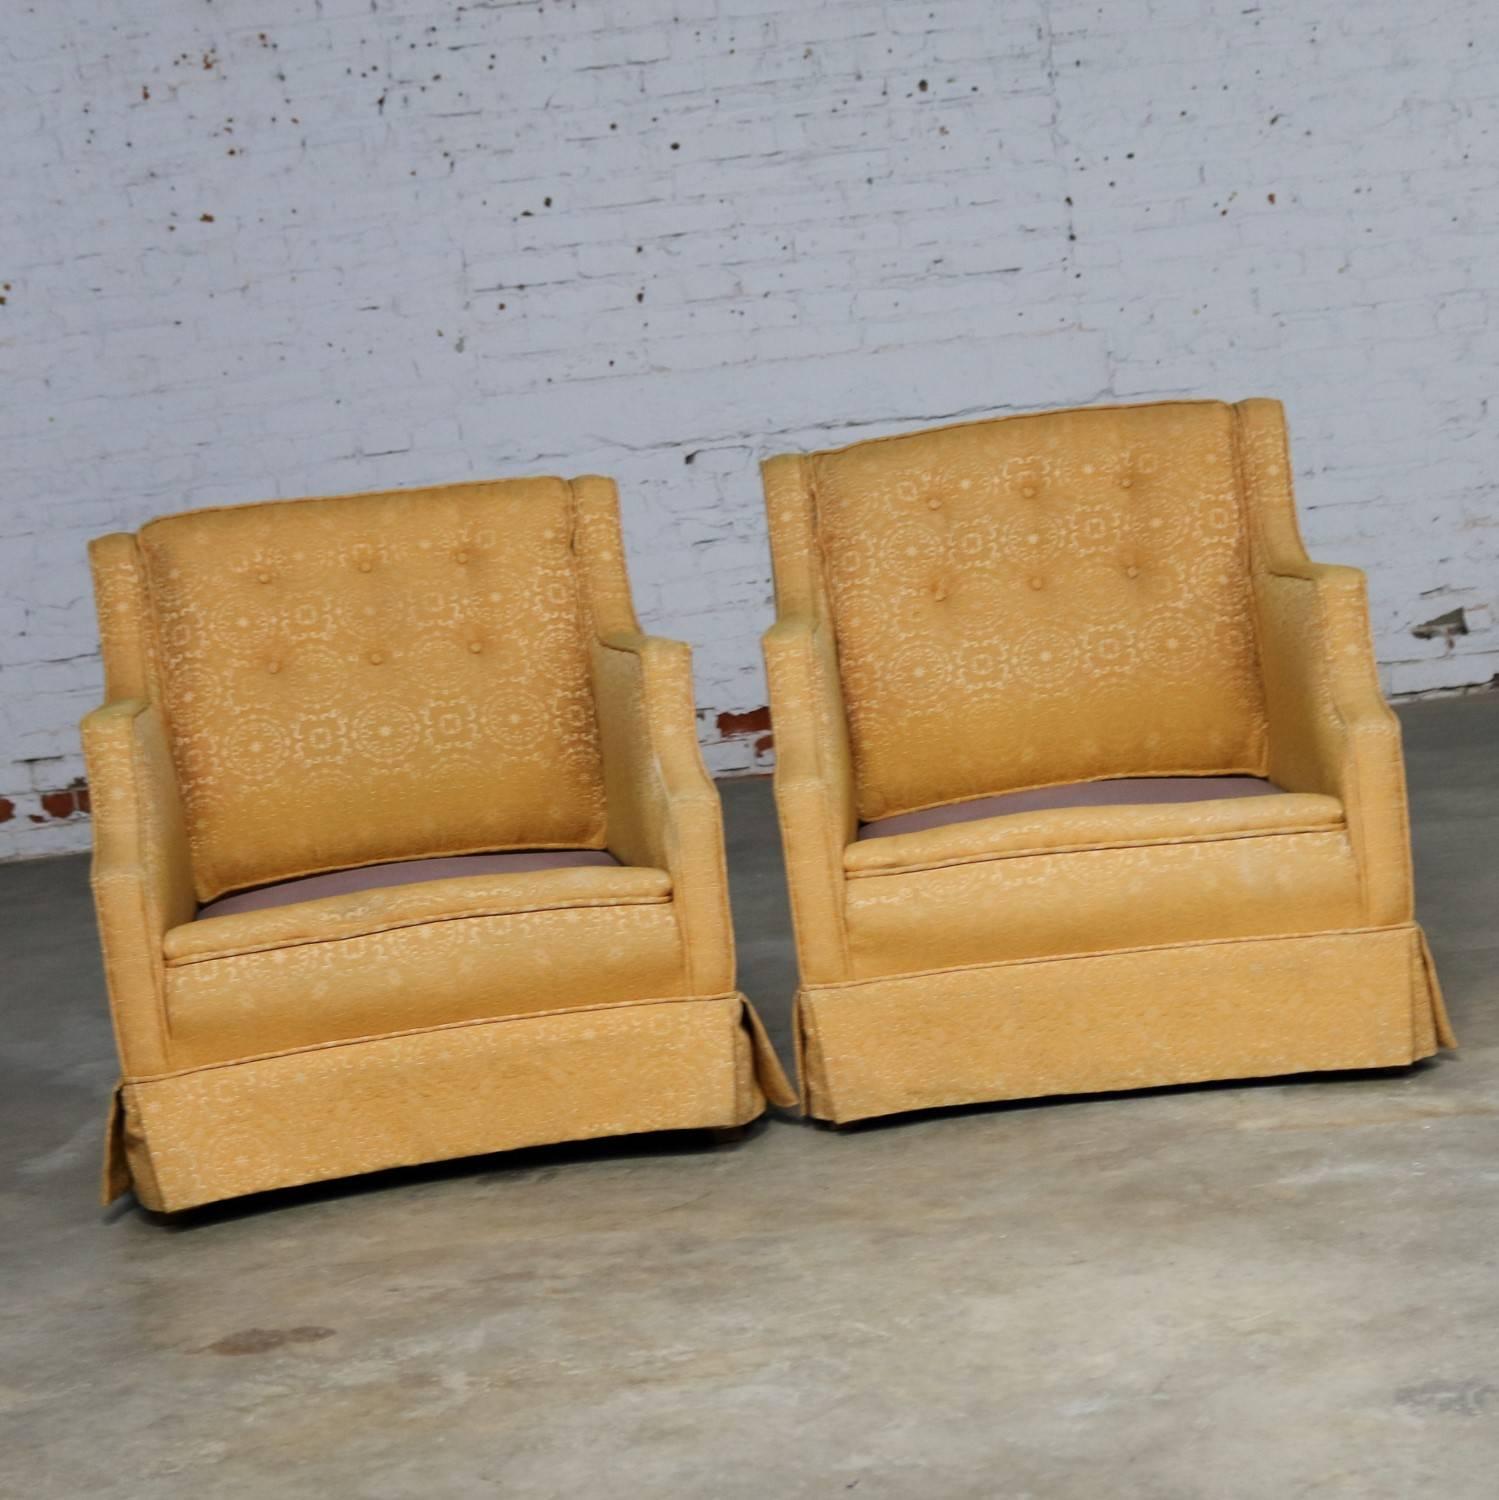 Great bones on this Mid-Century Modern pair of all upholstered club chairs or lounge chairs. In the style of Probber, Wormley, or Baughman. This pair is provided for their stylish and sturdy frames only. They do not have seat cushions and are